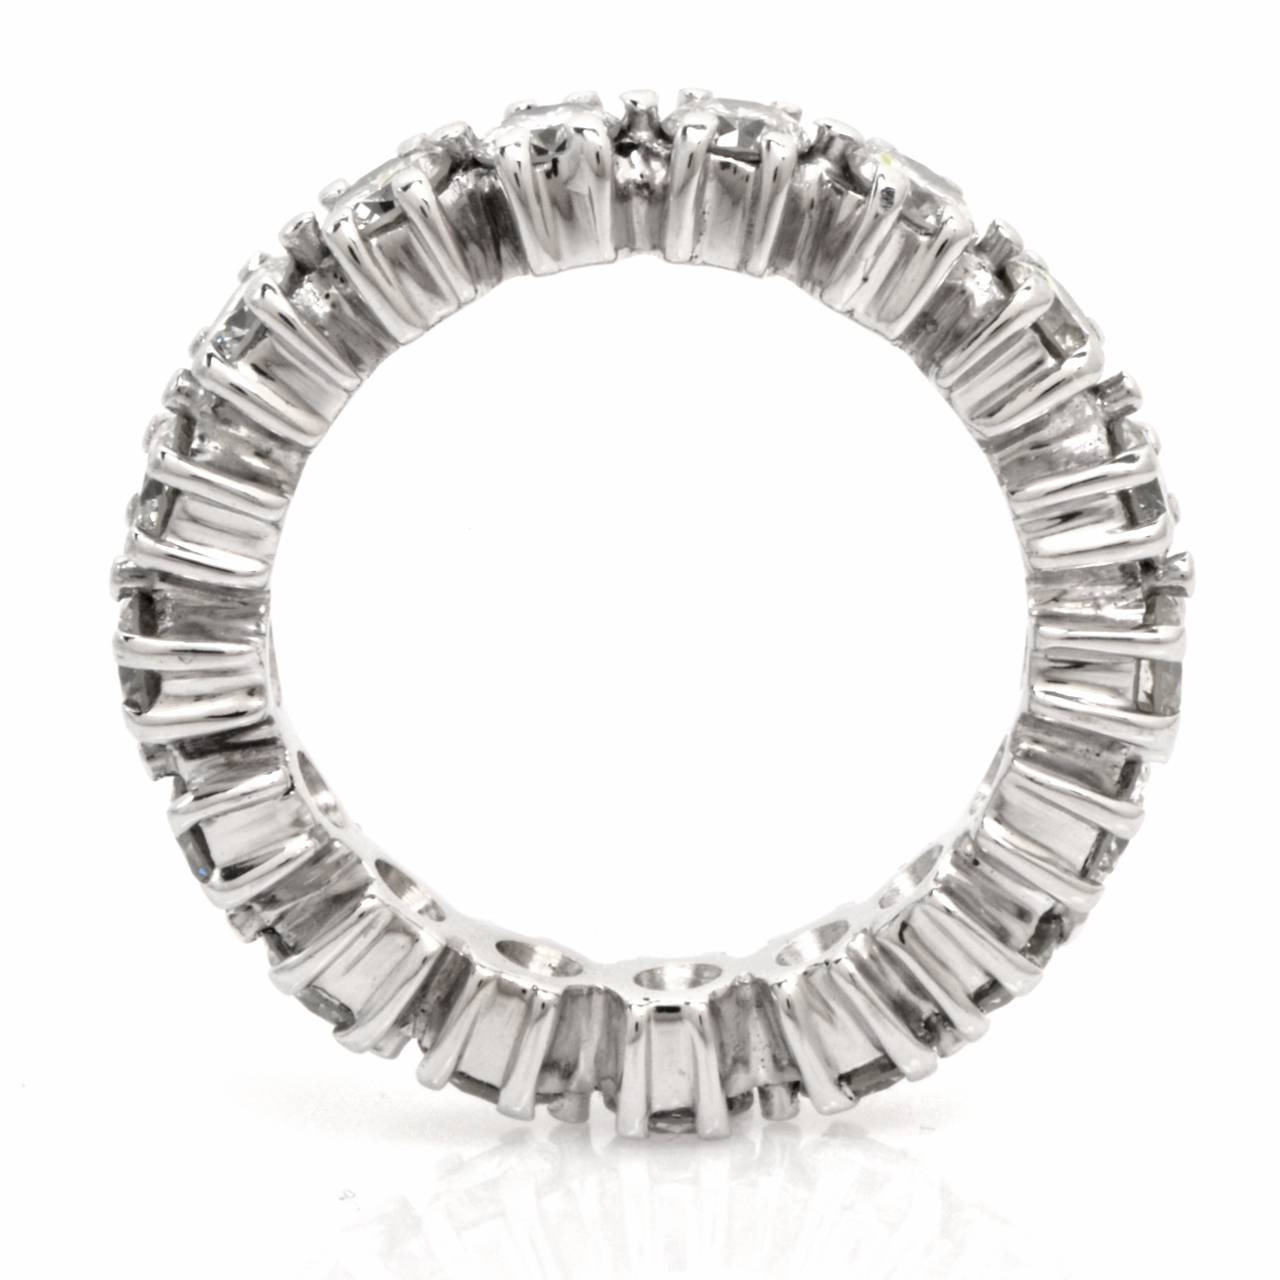 This alluringly feminine, stunning estate eternity band  of unmatched  sparkle and classically elegant aesthetic is crafted in solid platinum and weighs approx. 8.00 grams. This sophisticated  eternity band features 20 genuine prong-set 